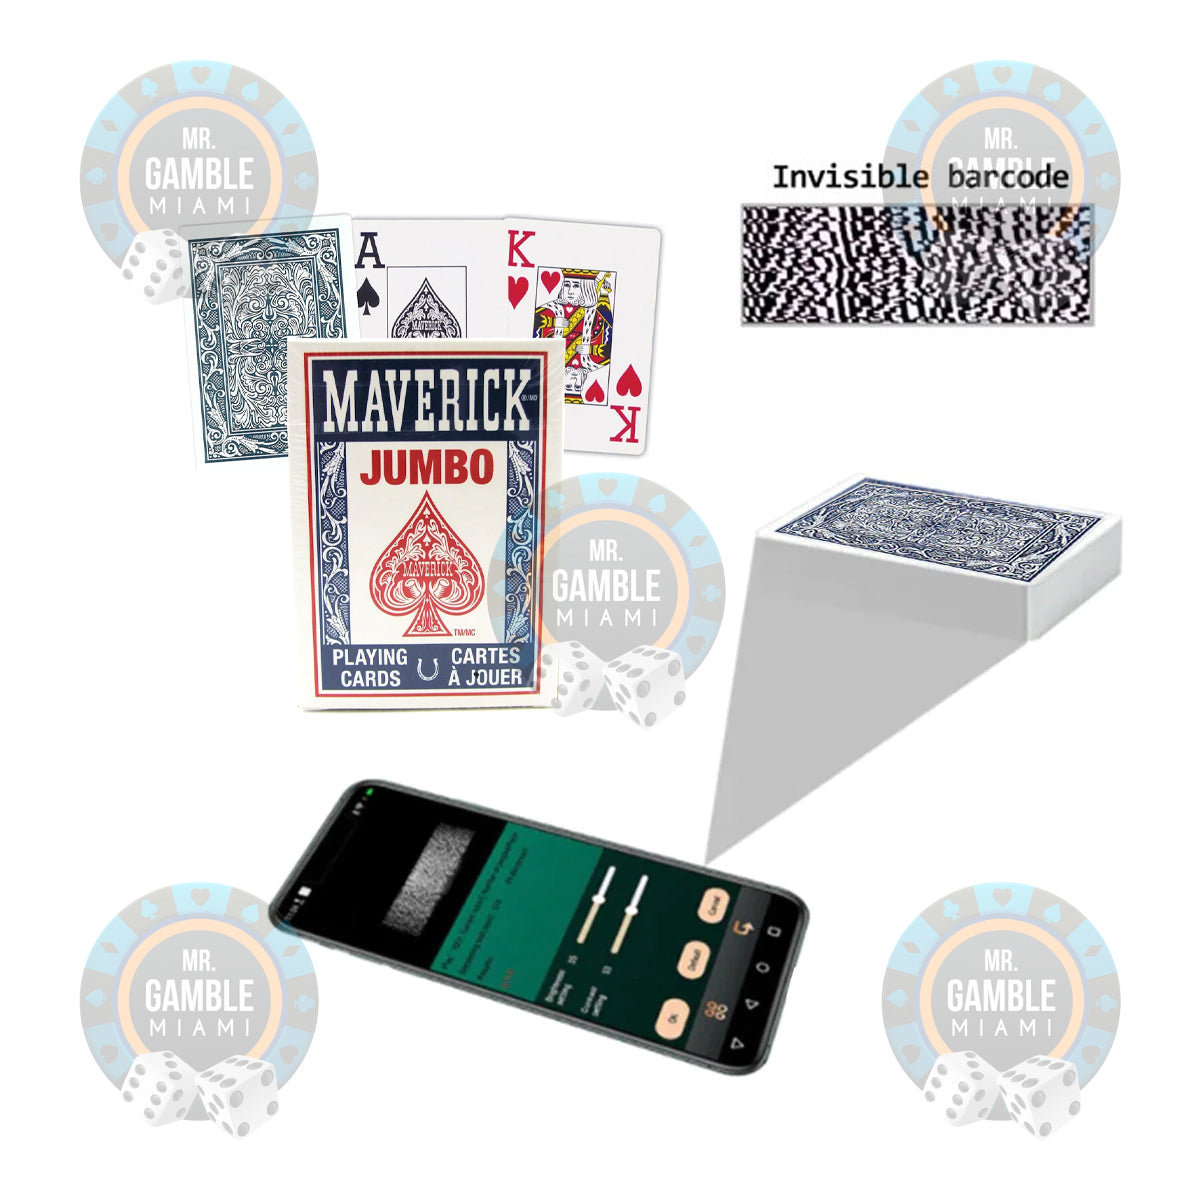 Barcode marked cards: Martin Kabrhel's style for poker cheating devices